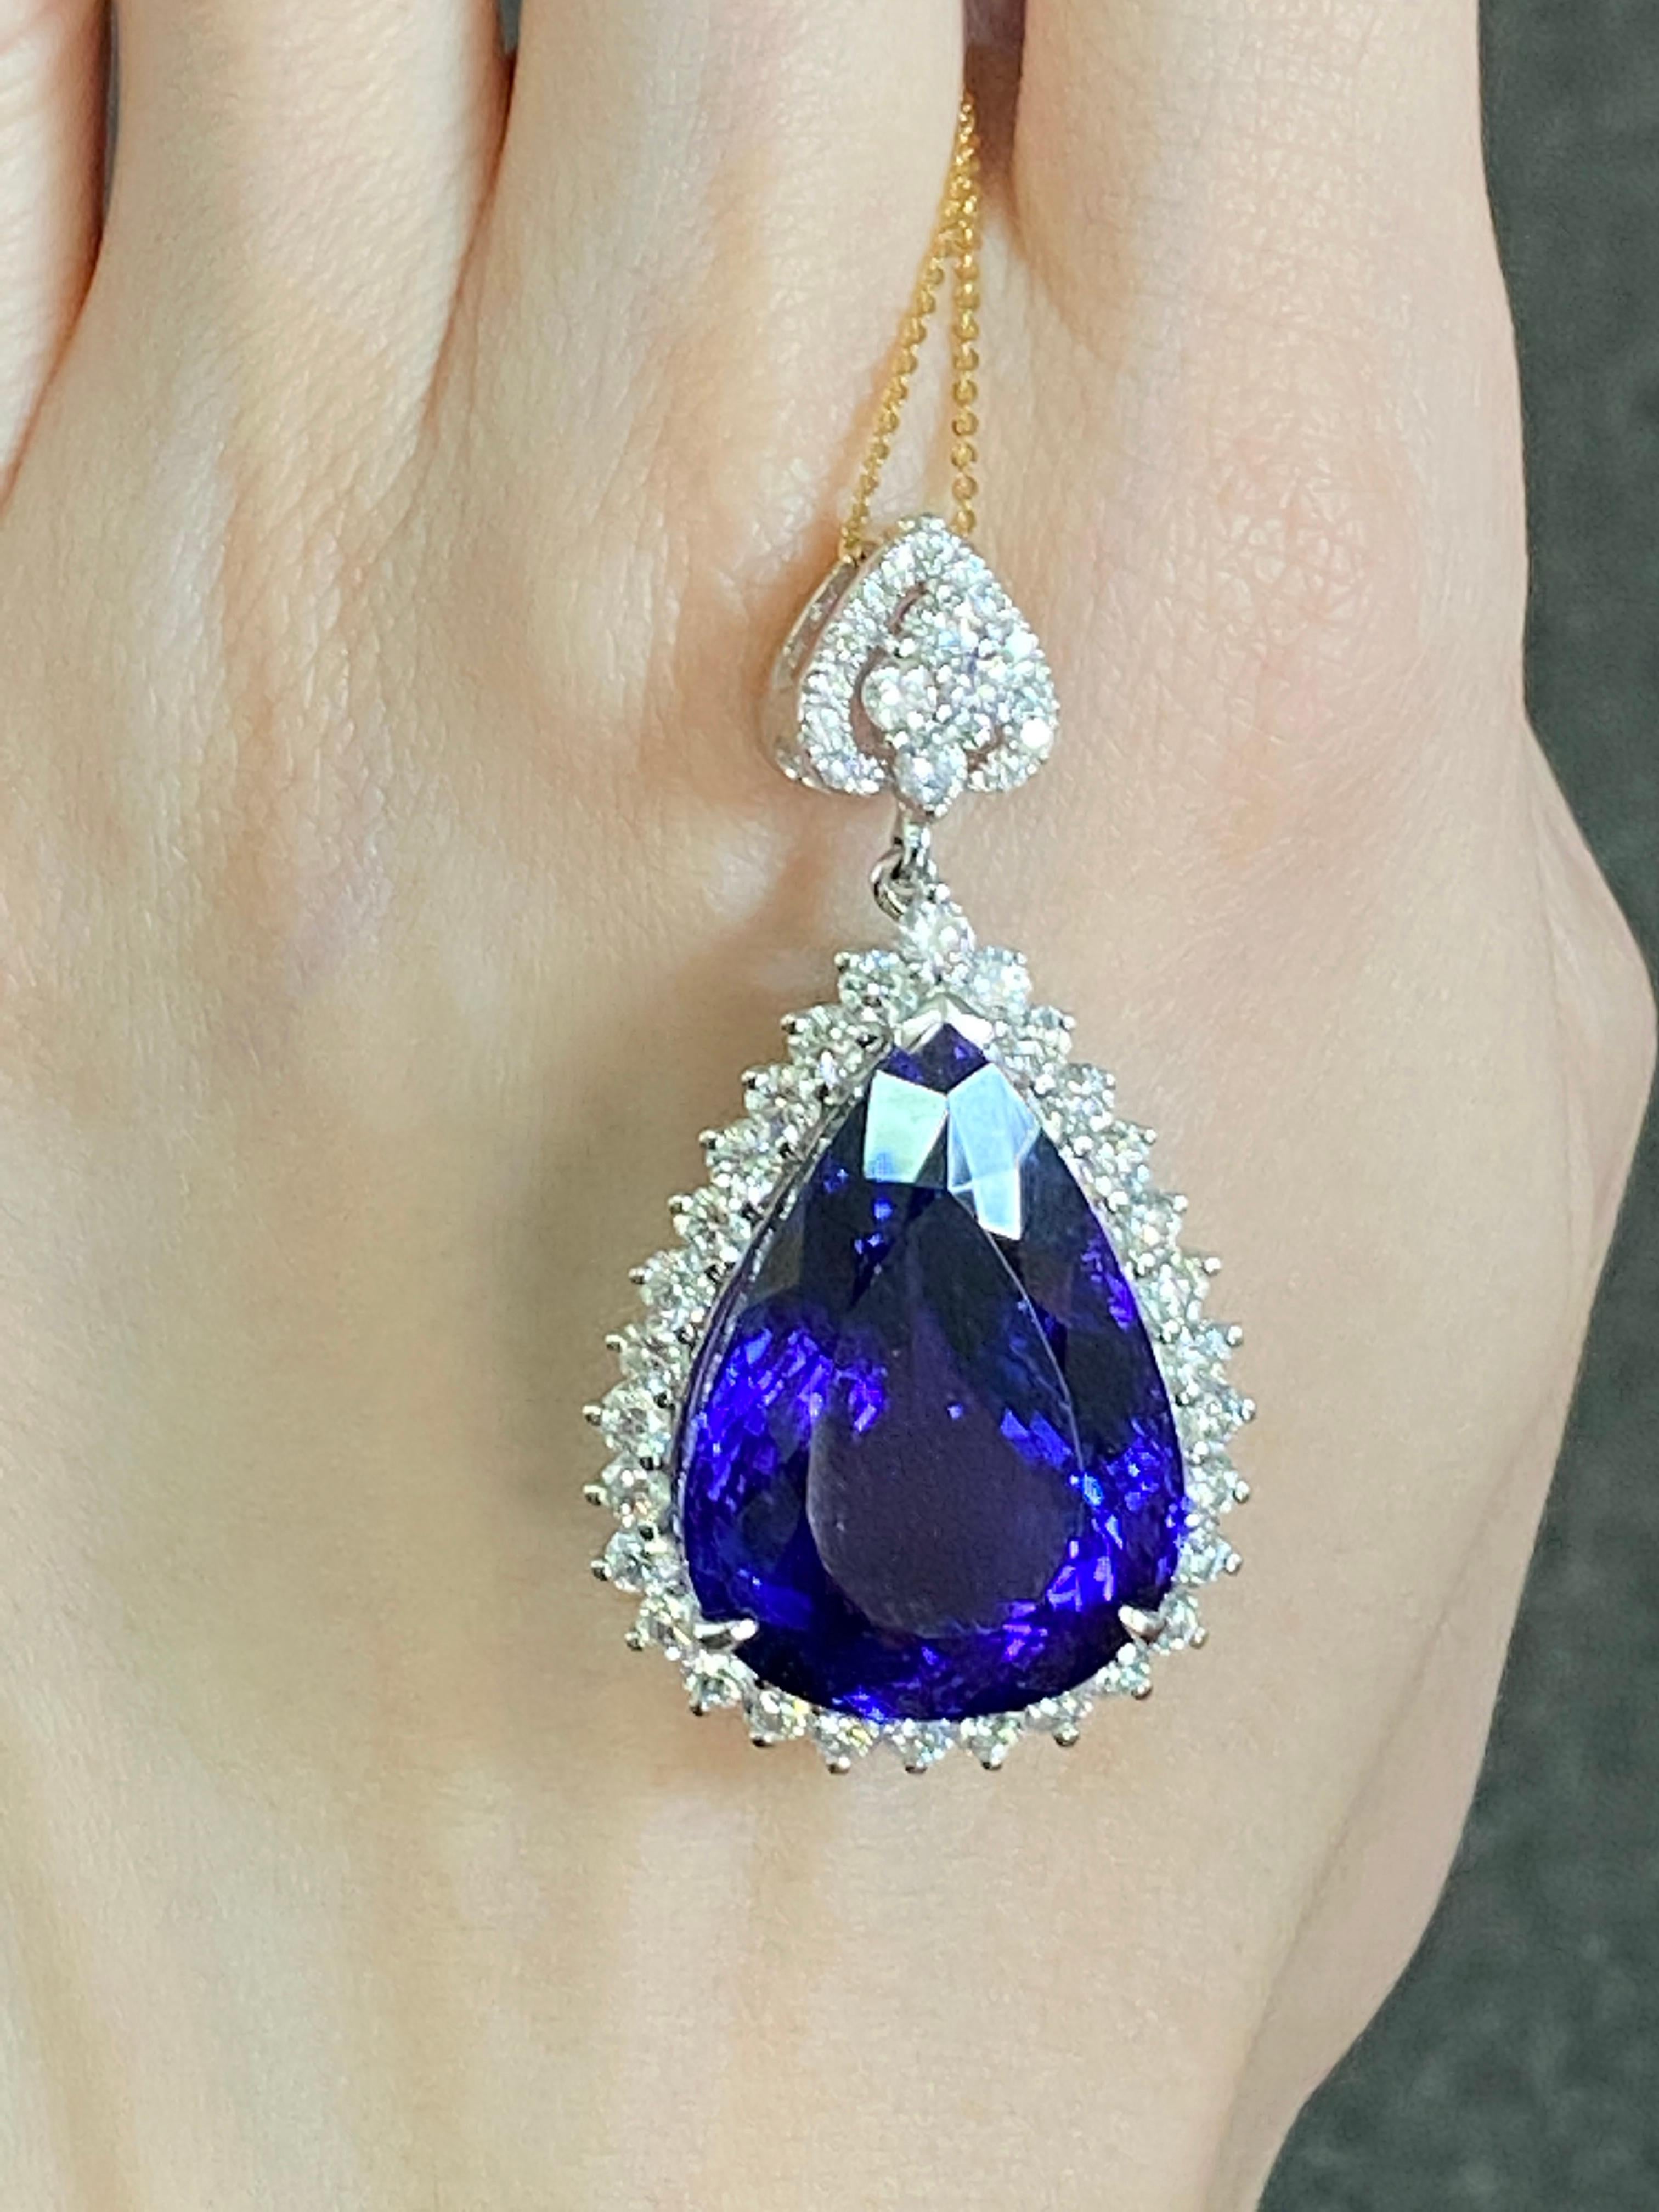 Natural 18K White Gold 44.7 Carat Tanzanite Pendent Necklace with Cert, Rare For Sale 1